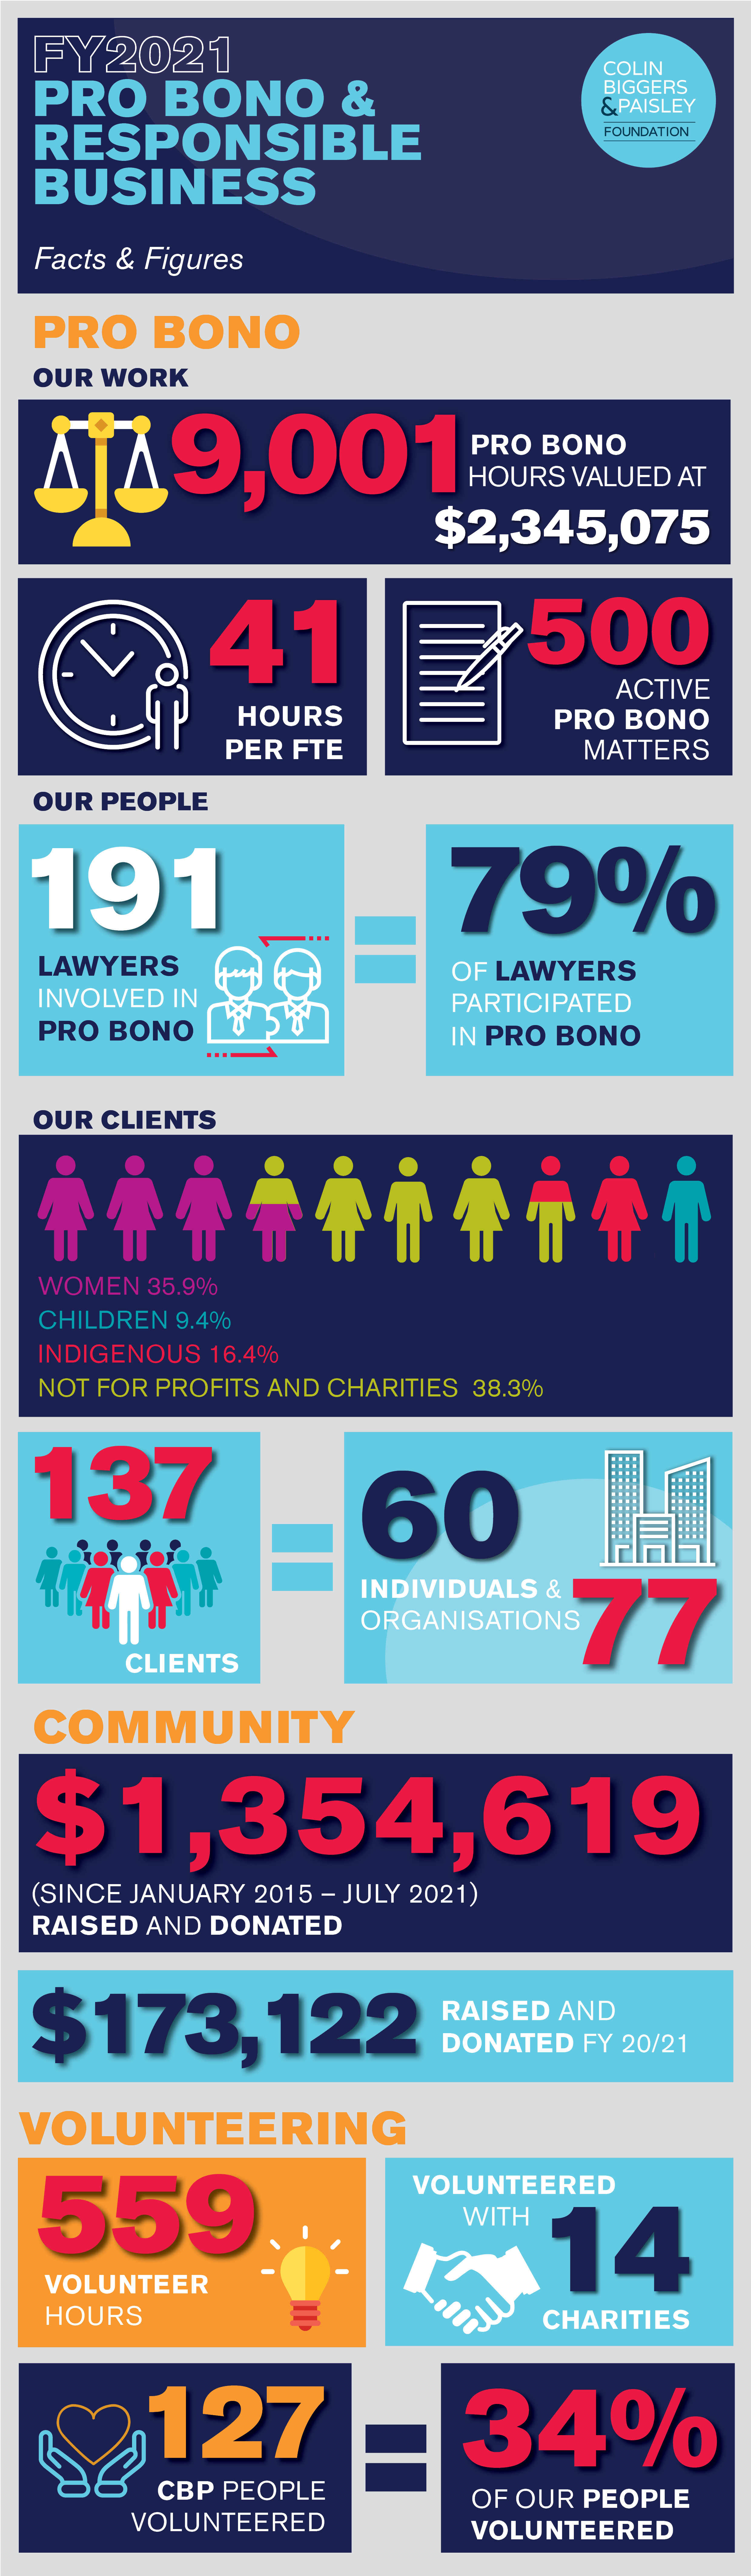 FY2021-Pro-Bono-and-Responsible-Business-Infographic-IssueD.jpg